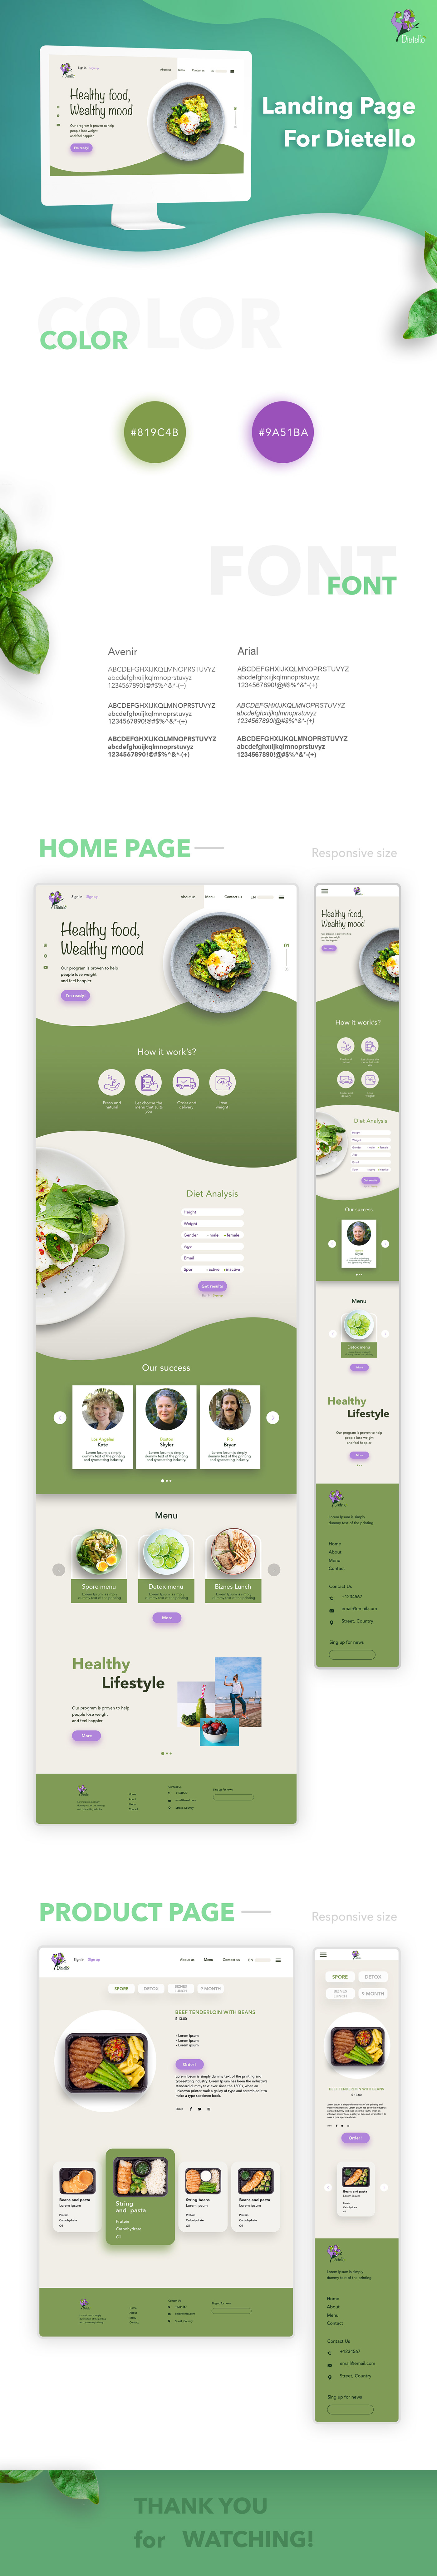 landing page ux/ui Website Responsive Product Page main page Food 